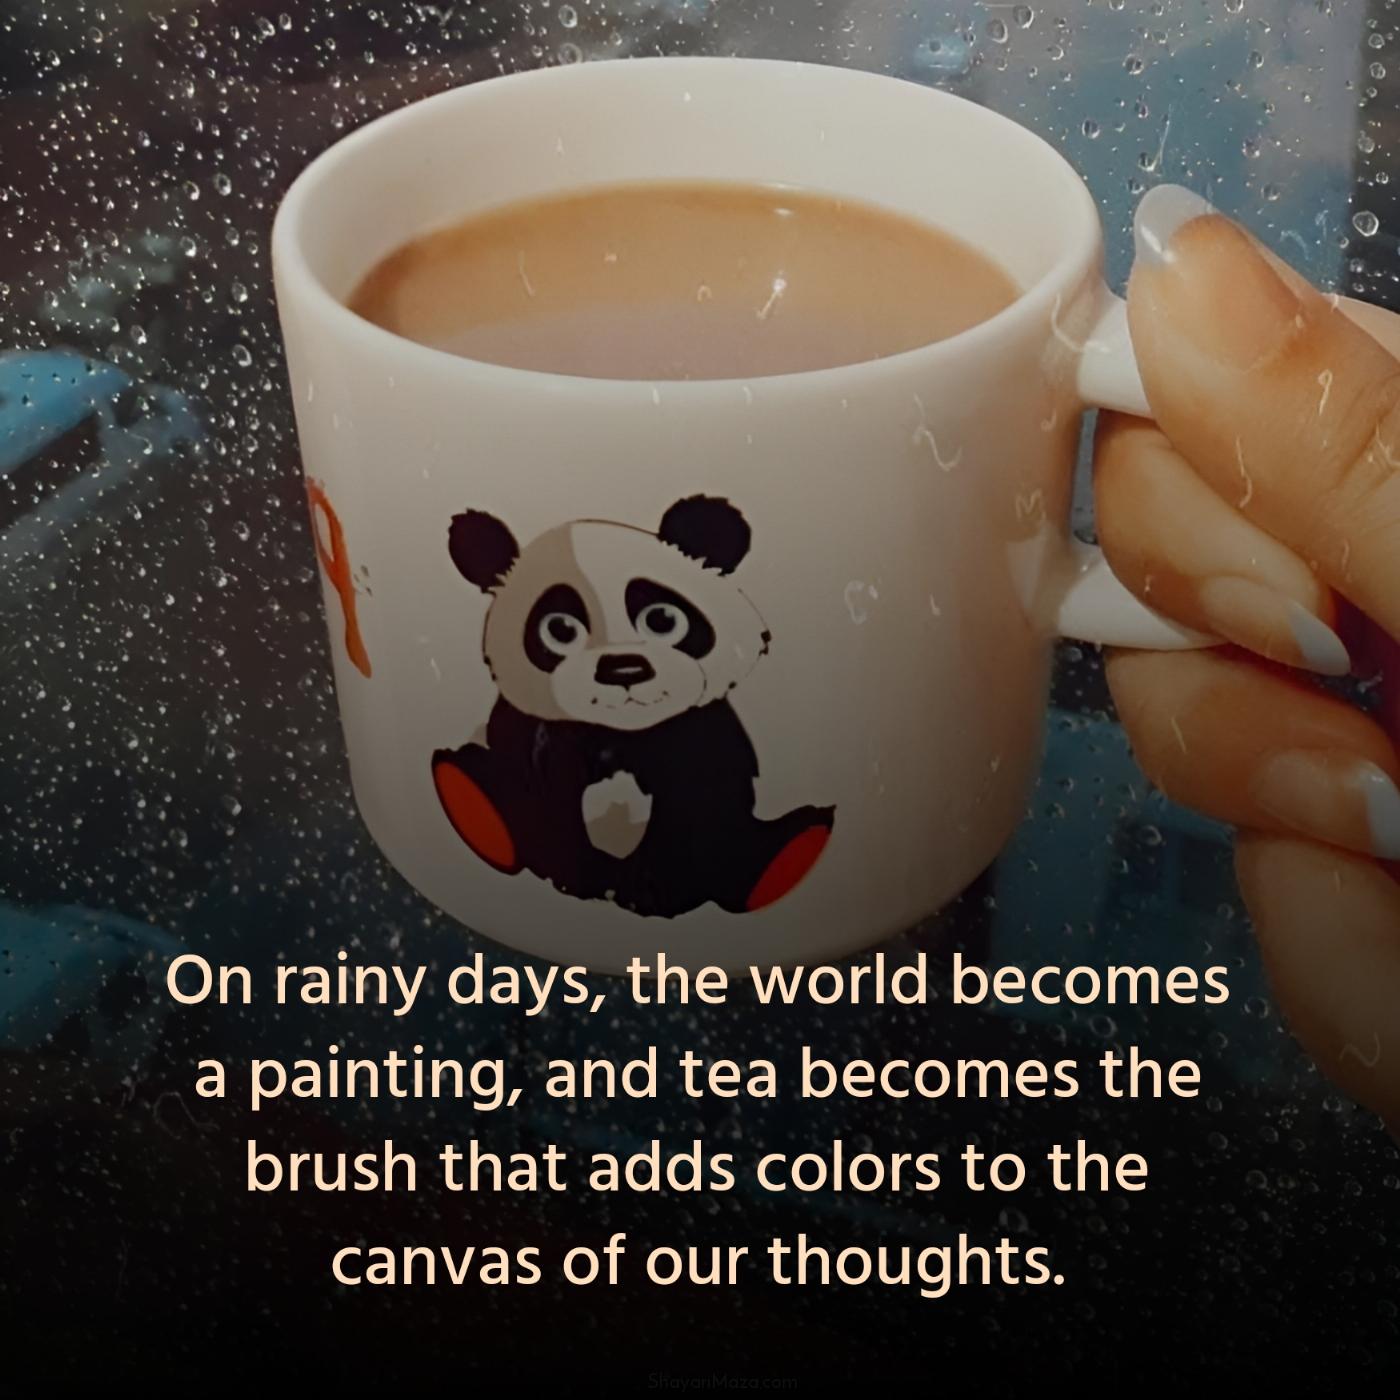 On rainy days the world becomes a painting and tea becomes the brush